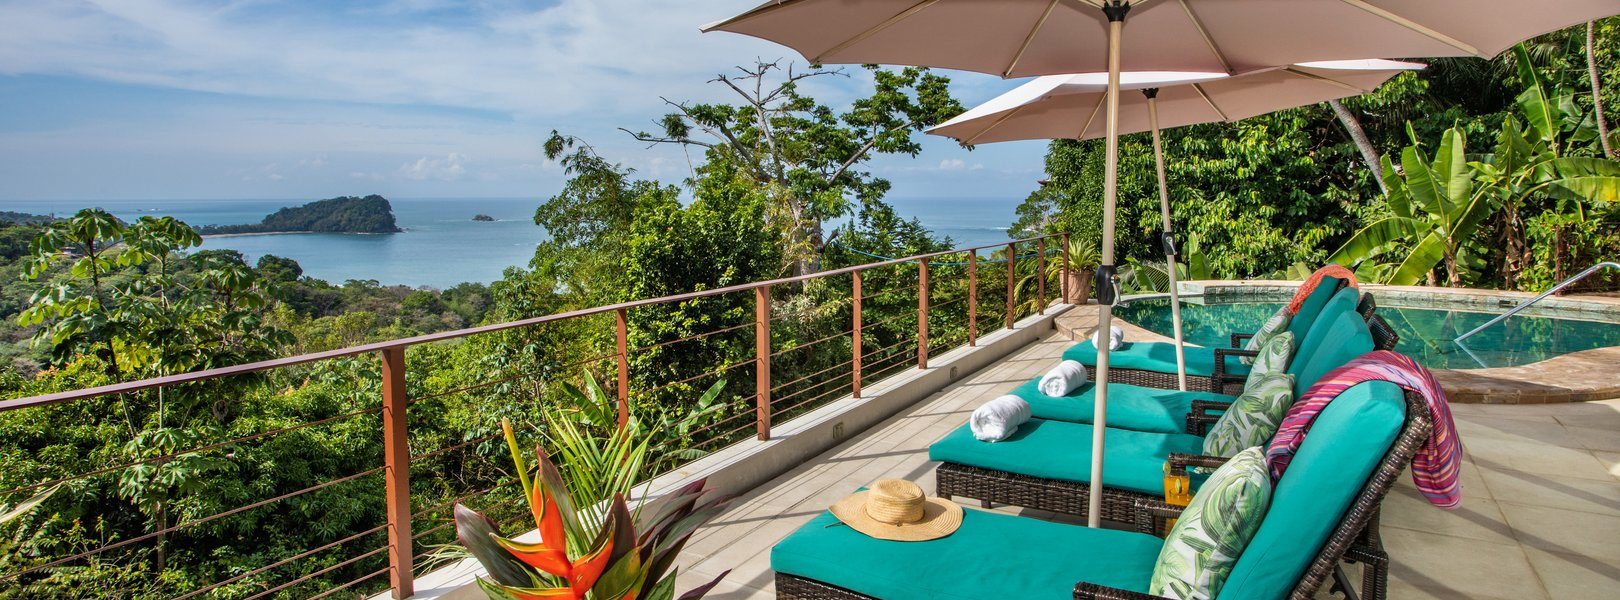 Sit down and relax, watch the magnificence of the pacific ocean. you may even spot a monkey of two.